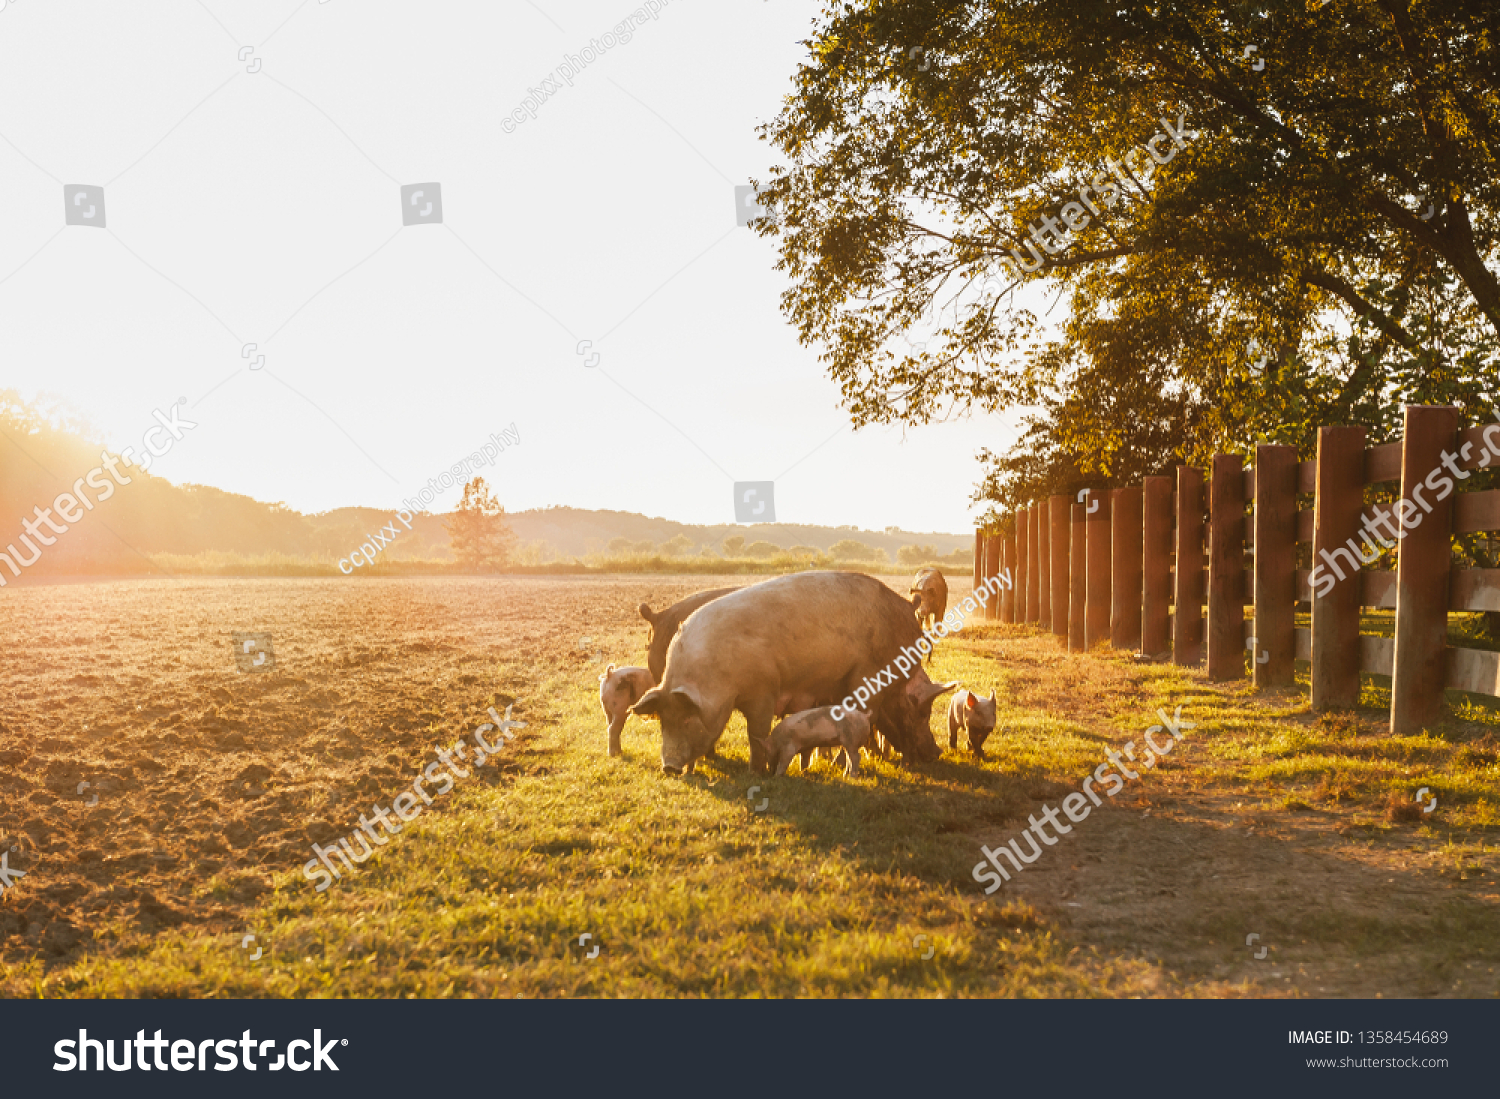 Drove of pigs on a pasture. Litter of piglets in a field. Sow and piglets eating. A golden pasture during sunset. Swine covered in mud. #1358454689